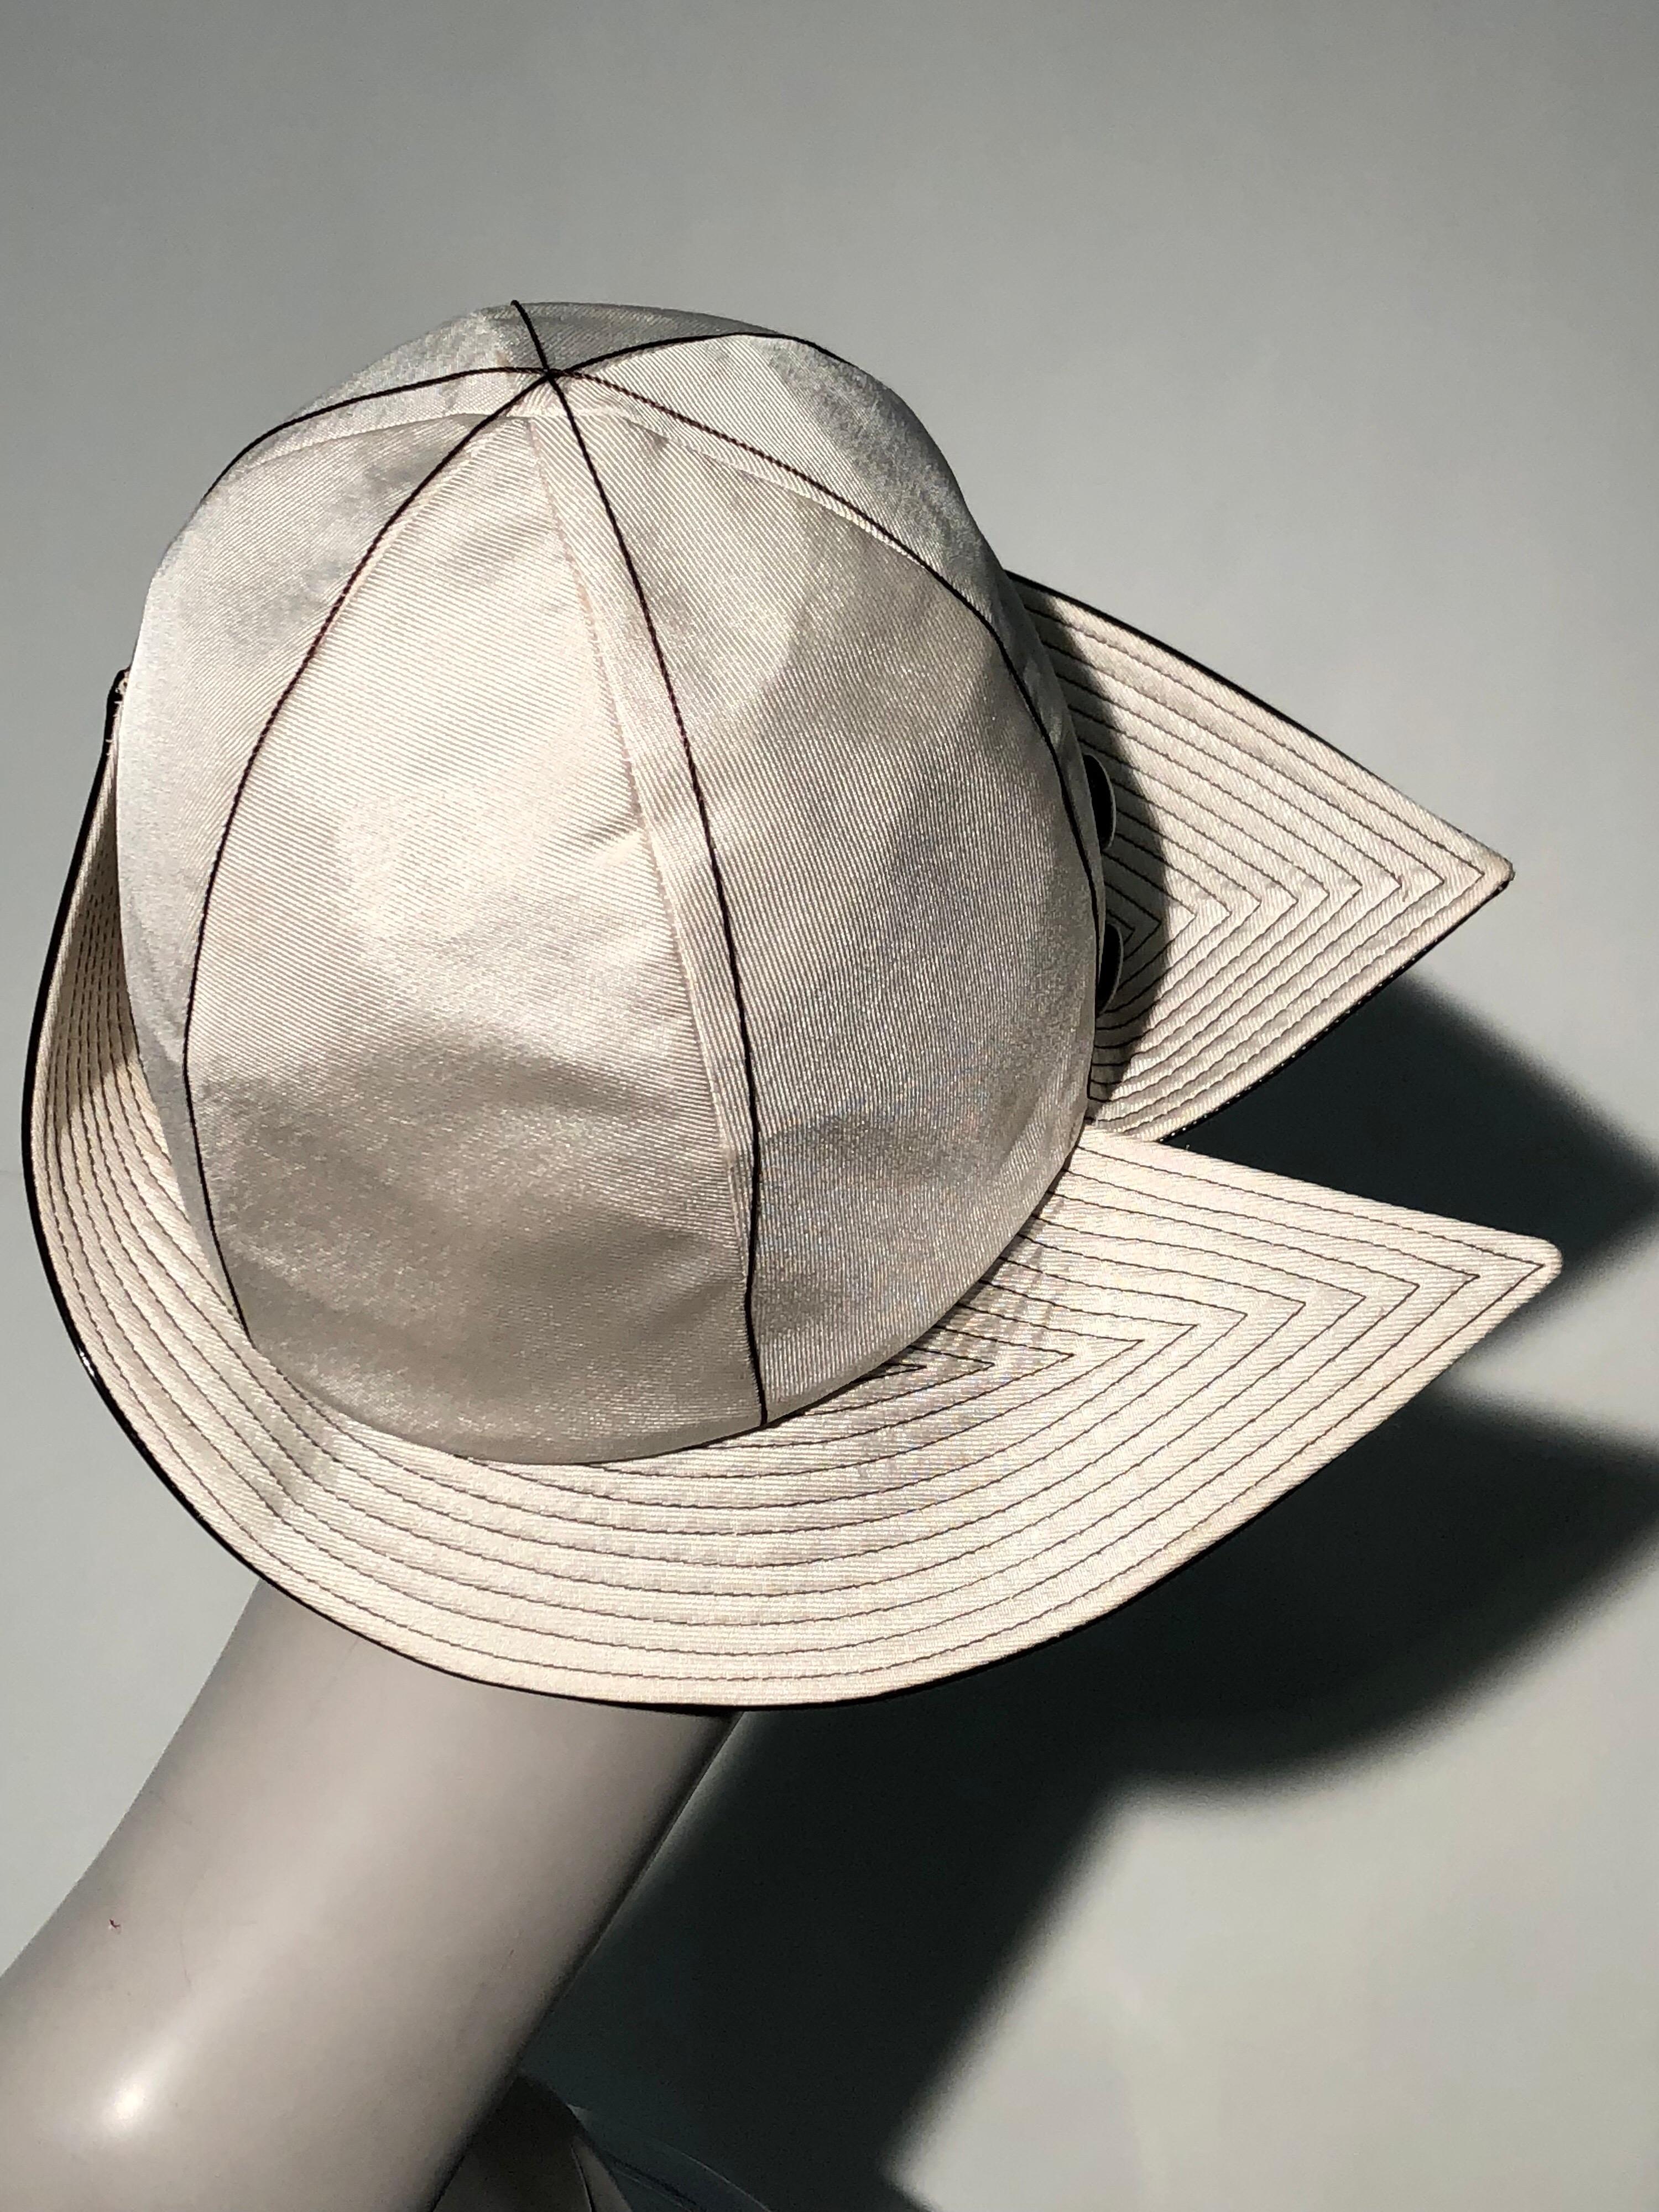 A fabulous 1960s Mr. John ivory faille dome-shaped Mod style hat with wide trapunto-stitched brim in brown patent leather. Brim is split at side. Two brown patent leather buttons adorn the side. A surprisingly cheery floral lining inside.